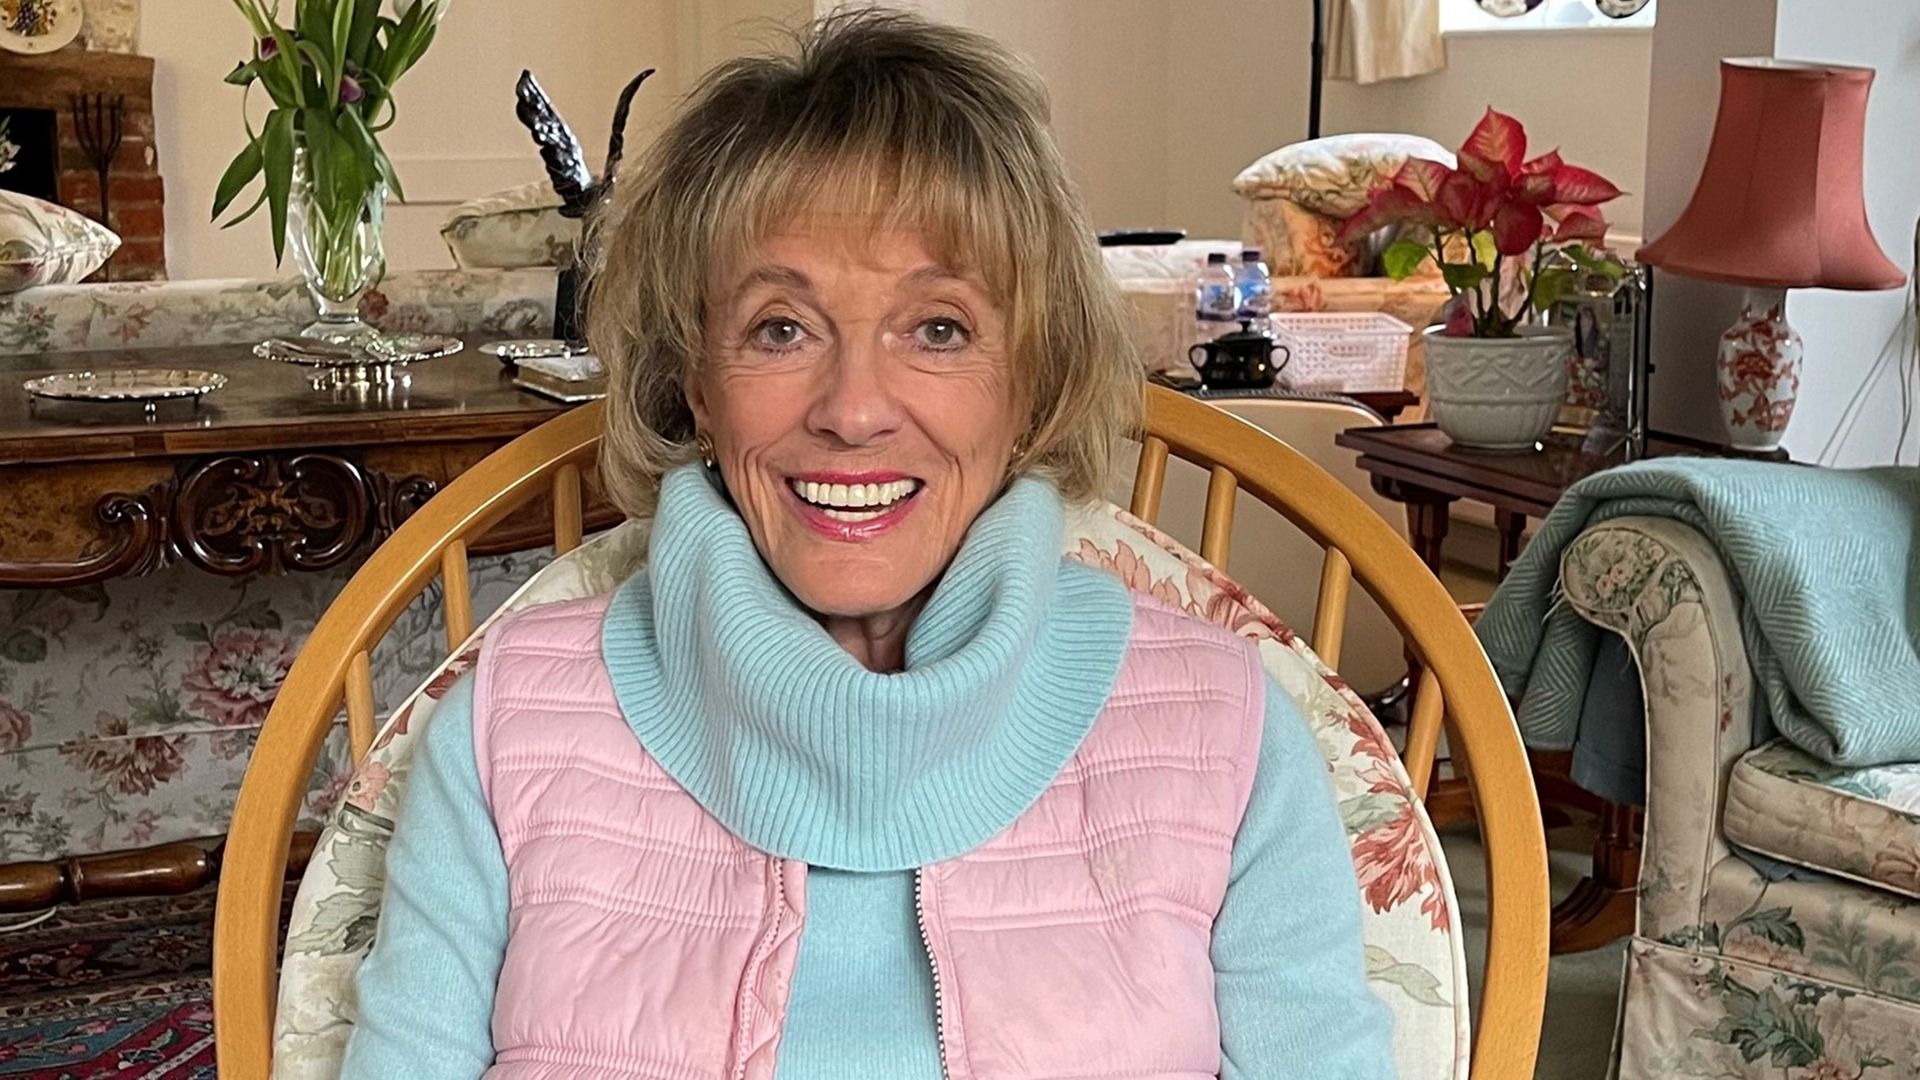 MPs to debate assisted dying after campaign backed by Dame Esther Rantzen